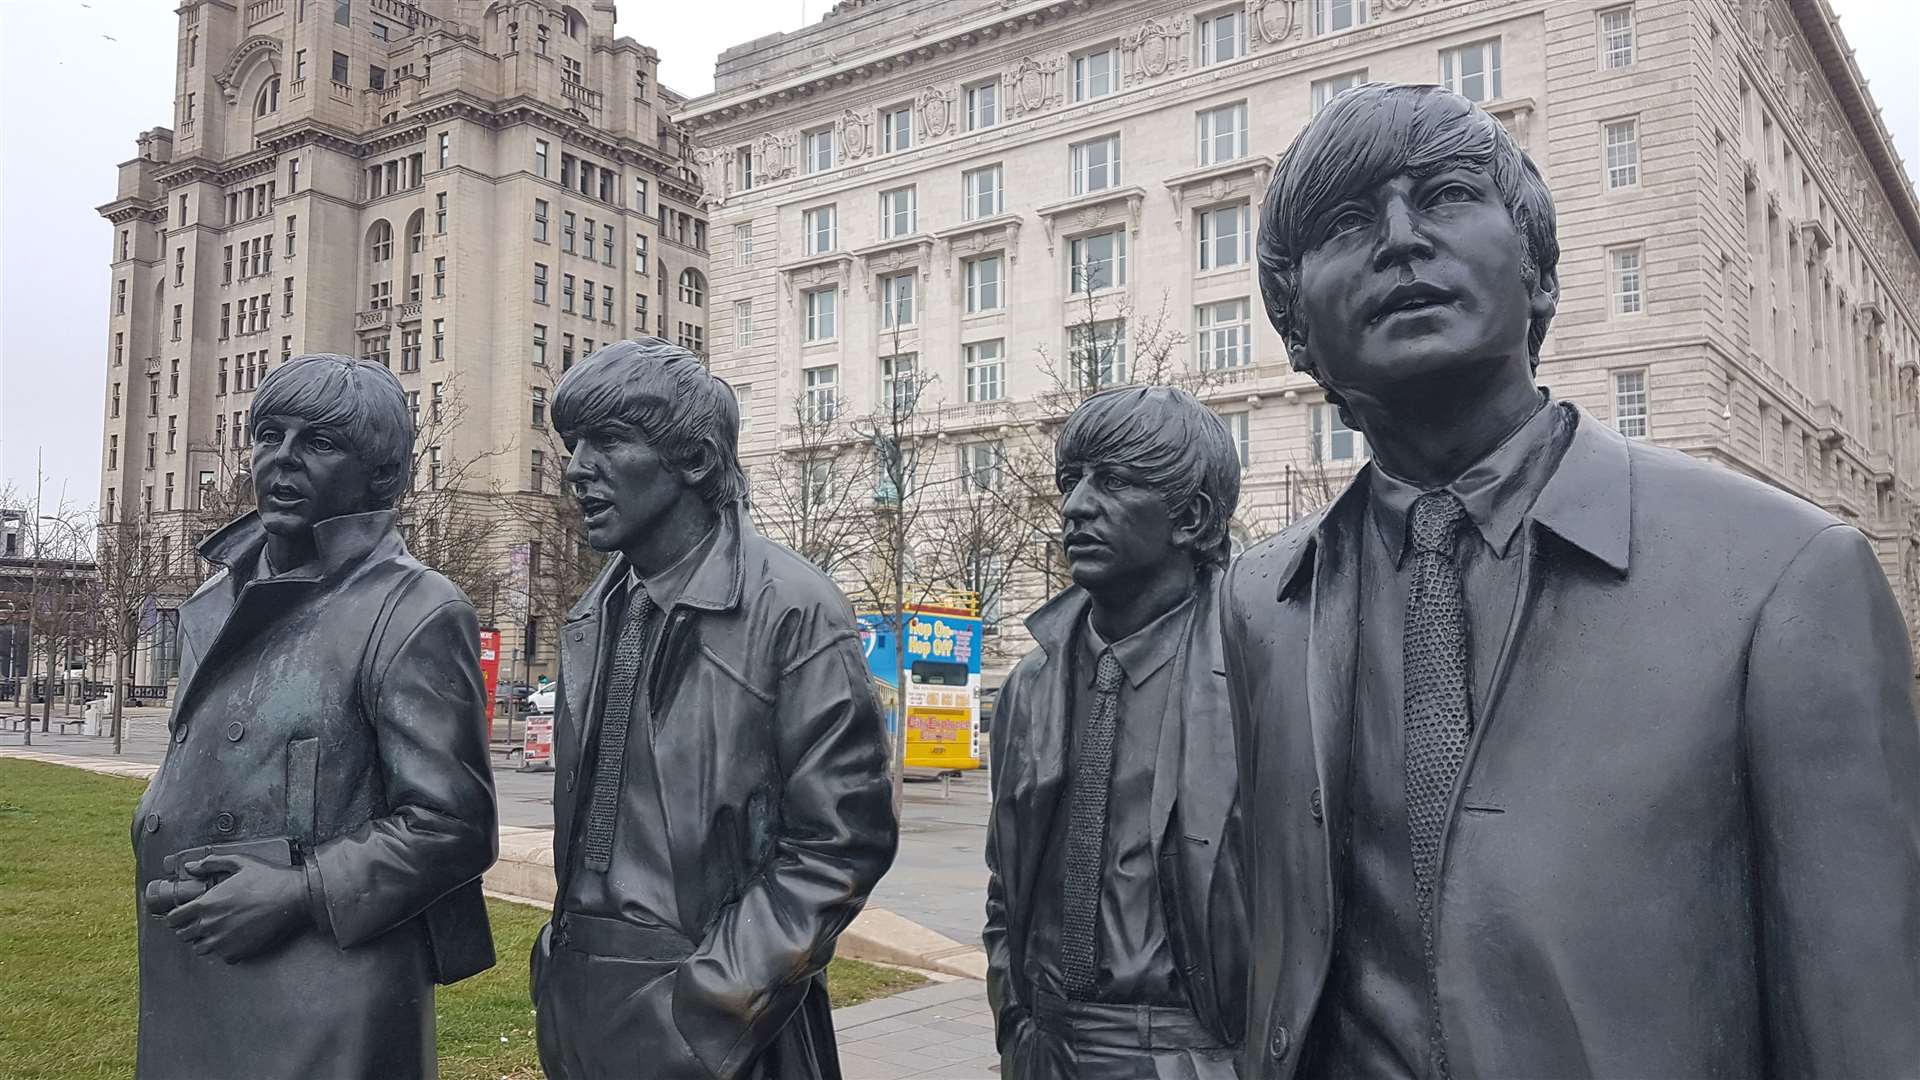 Hopefully Canterbury won't follow in the footsteps of Liverpool and lose its Unesco status... not that it was John, Paul, George or Ringo's fault